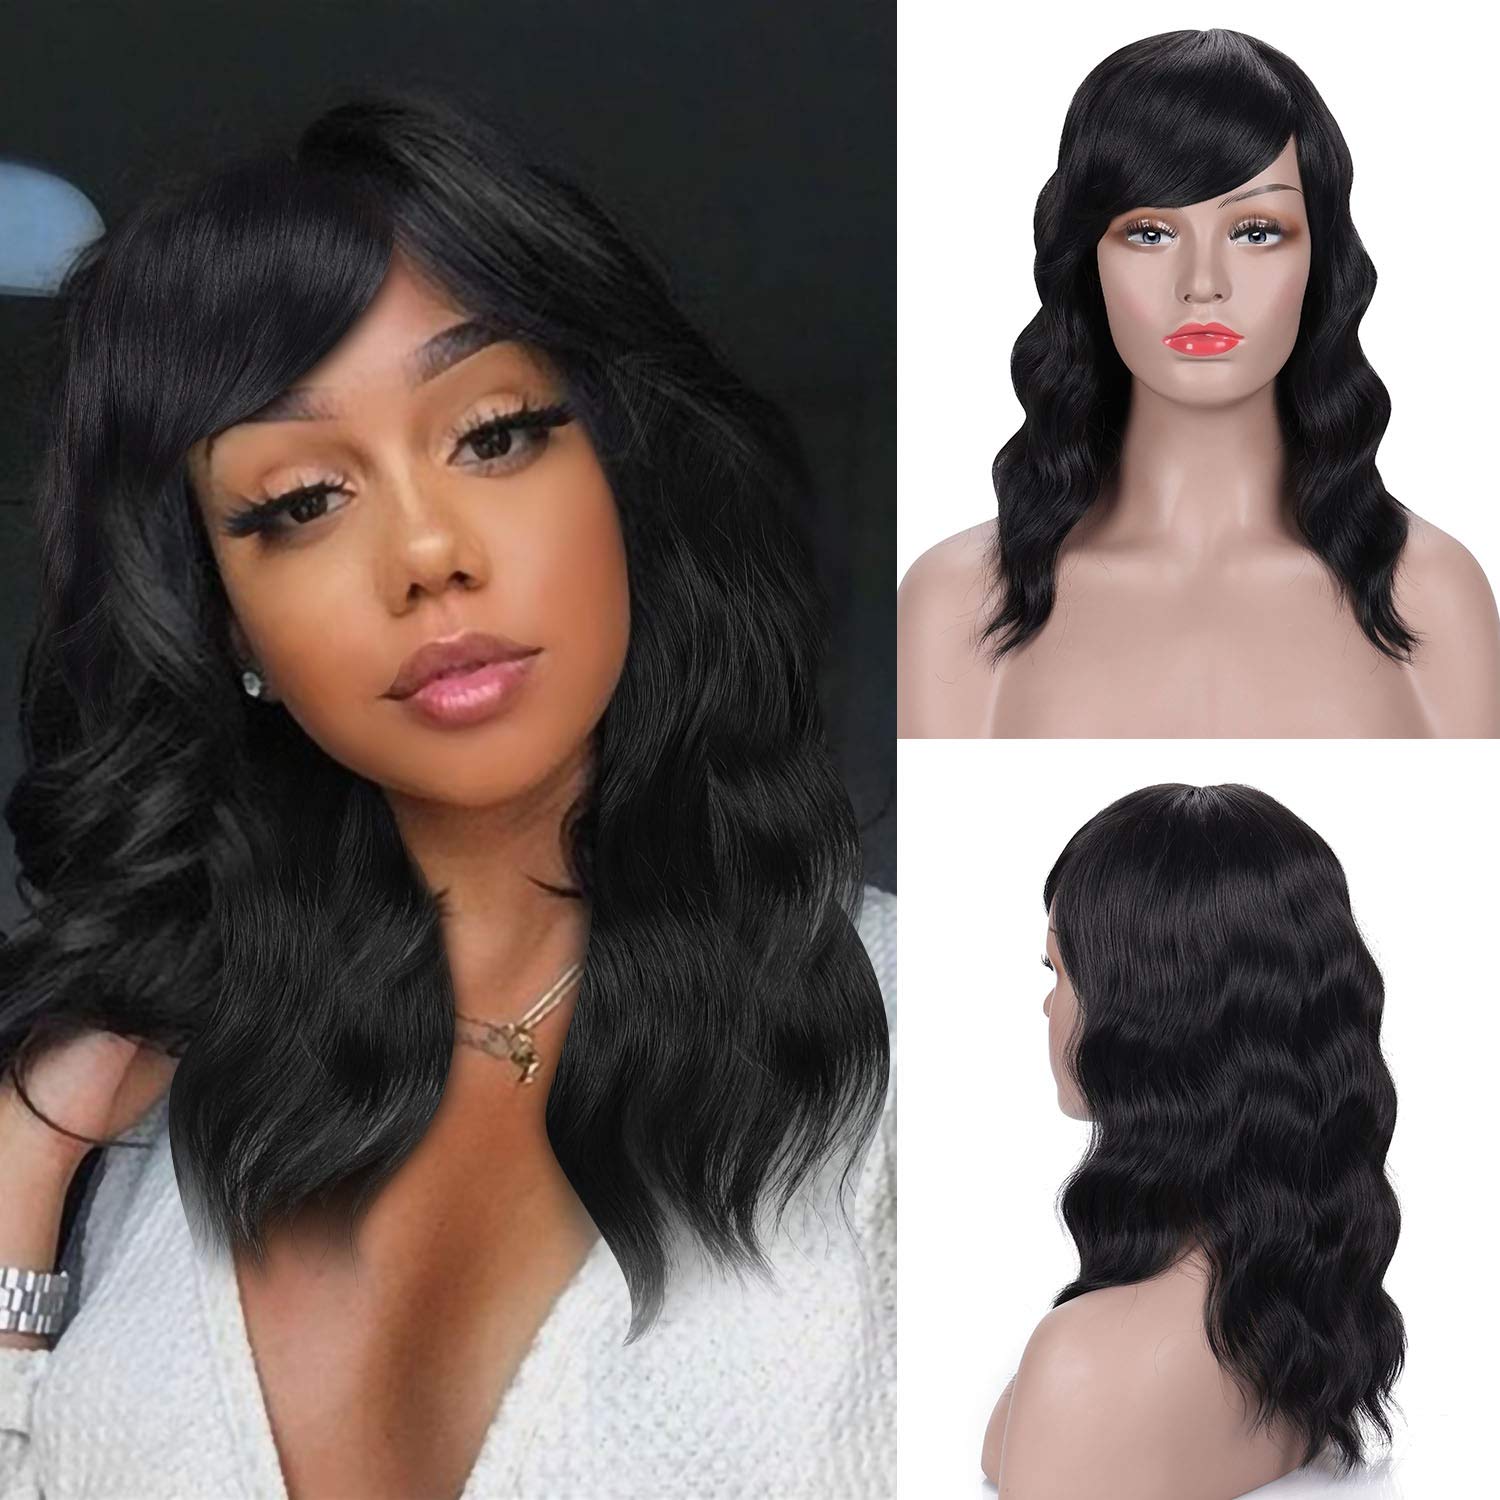 Price:$15.88     Eerya Fashion Wigs with Air Bangs 14 Inch Short Curly Hair Womens Wigs Charming Natural Wavy Synthetic Hair Wigs, Soft Smooth Elastic Straps Comfortable & Adjustable (14 Inch, 1B# Natural Black)   Beauty